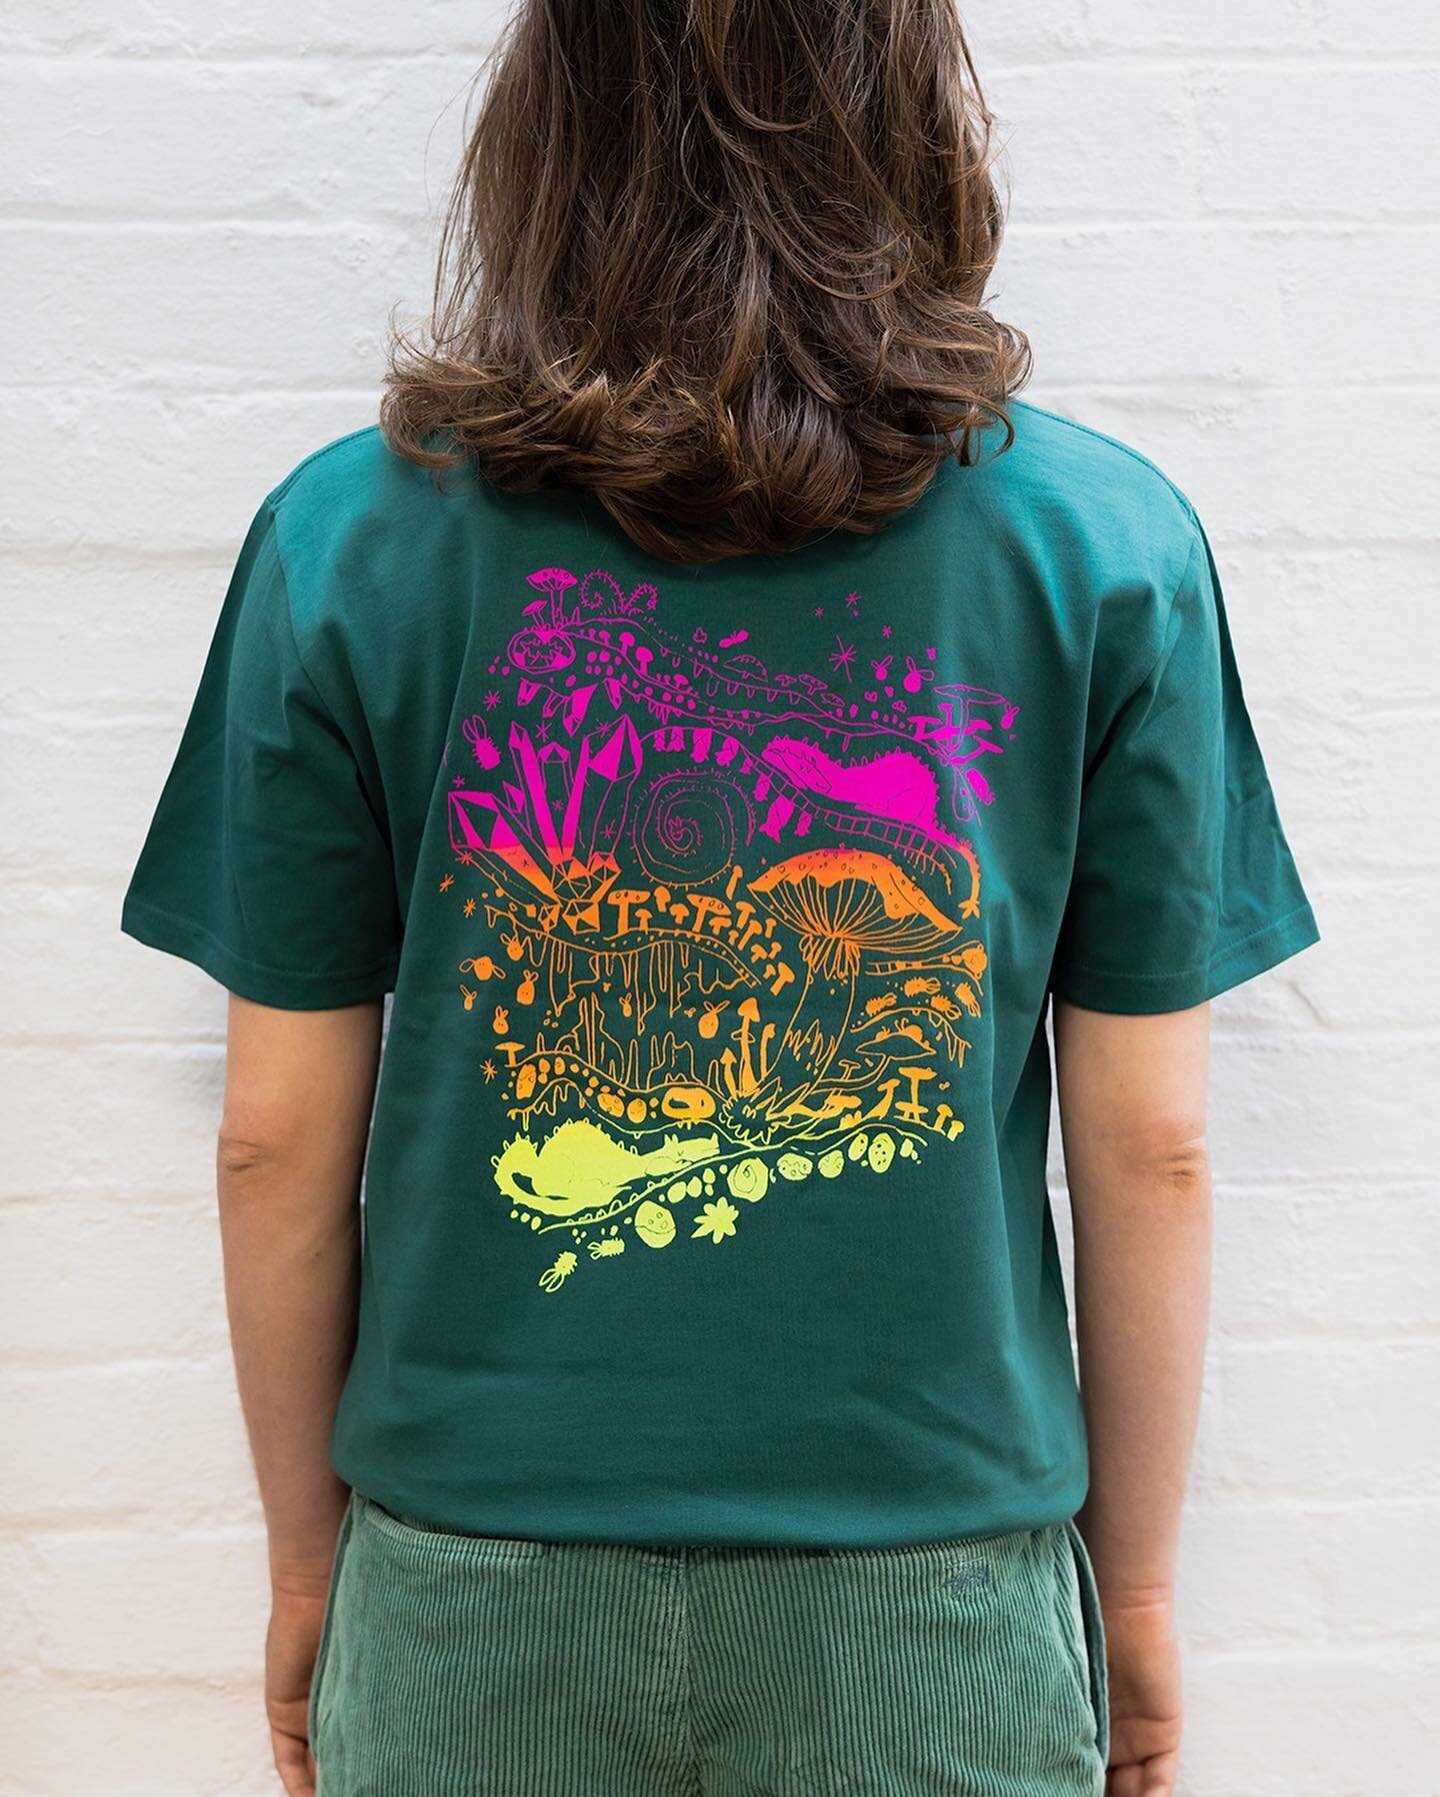 New mushroomy tee in my webshop! Yummy! Limited batch 🍀 Pic by @jacquie.manning